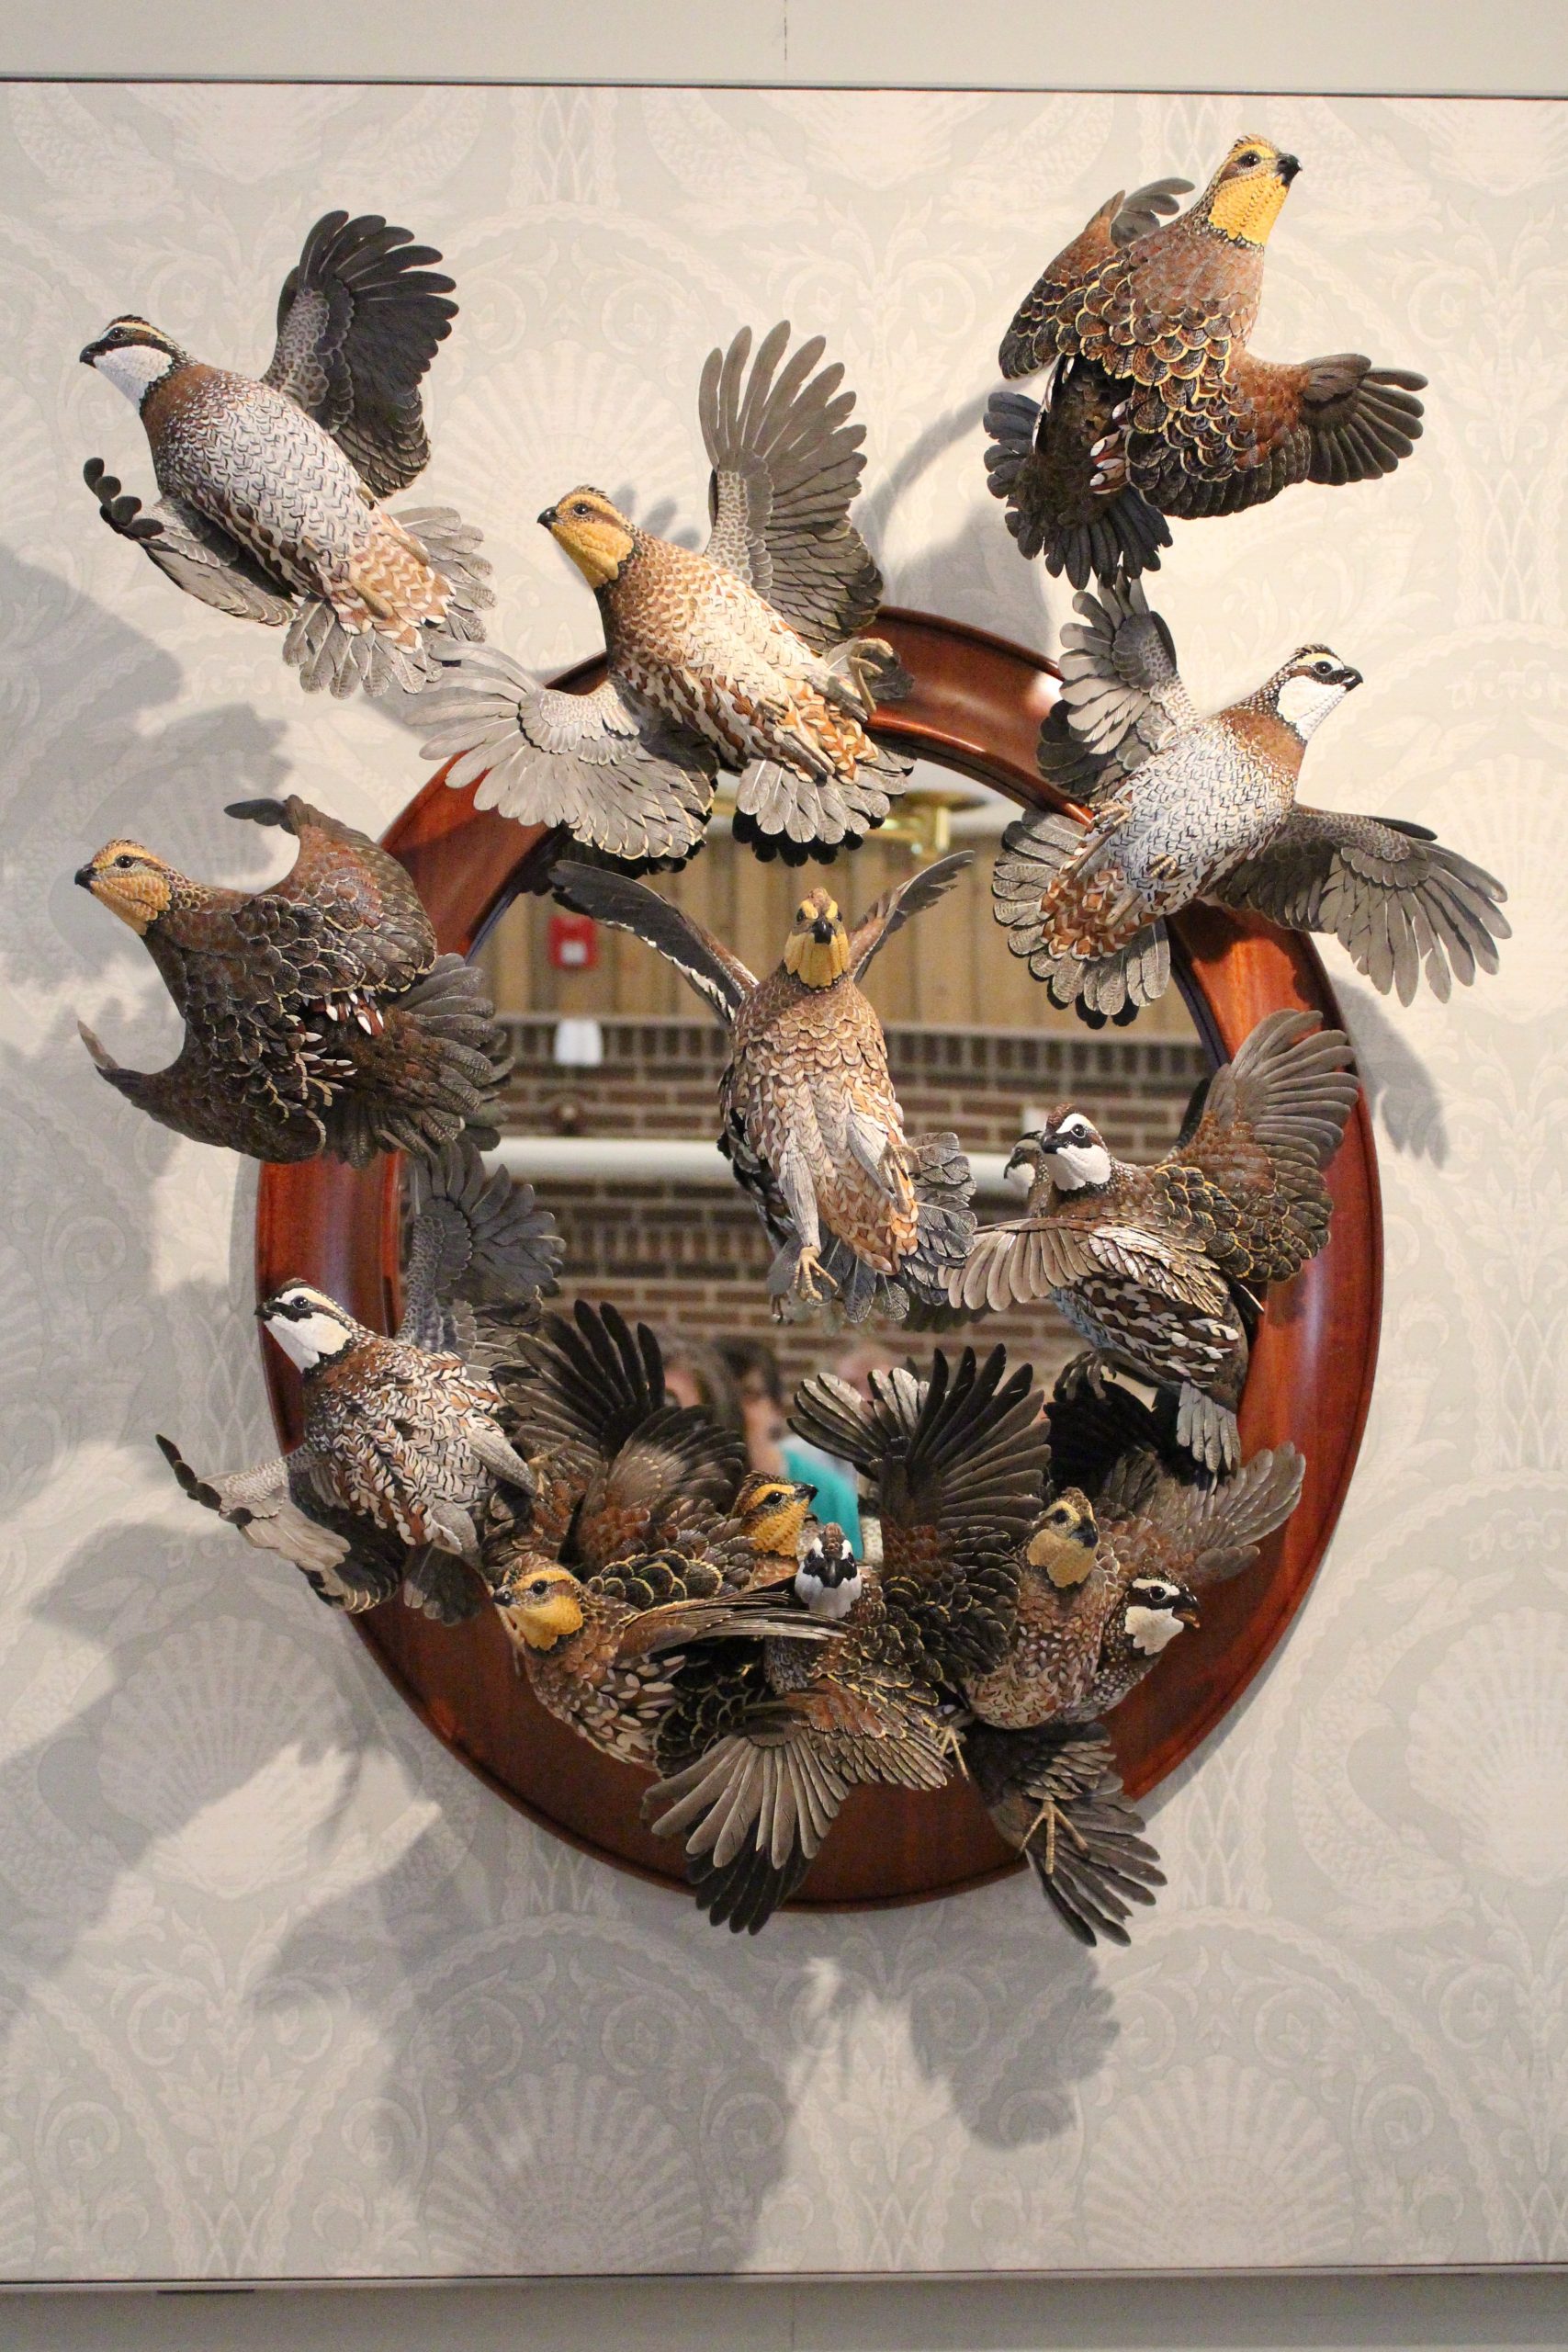 Quail Wall Mount
by Grainger McKoy, NSS